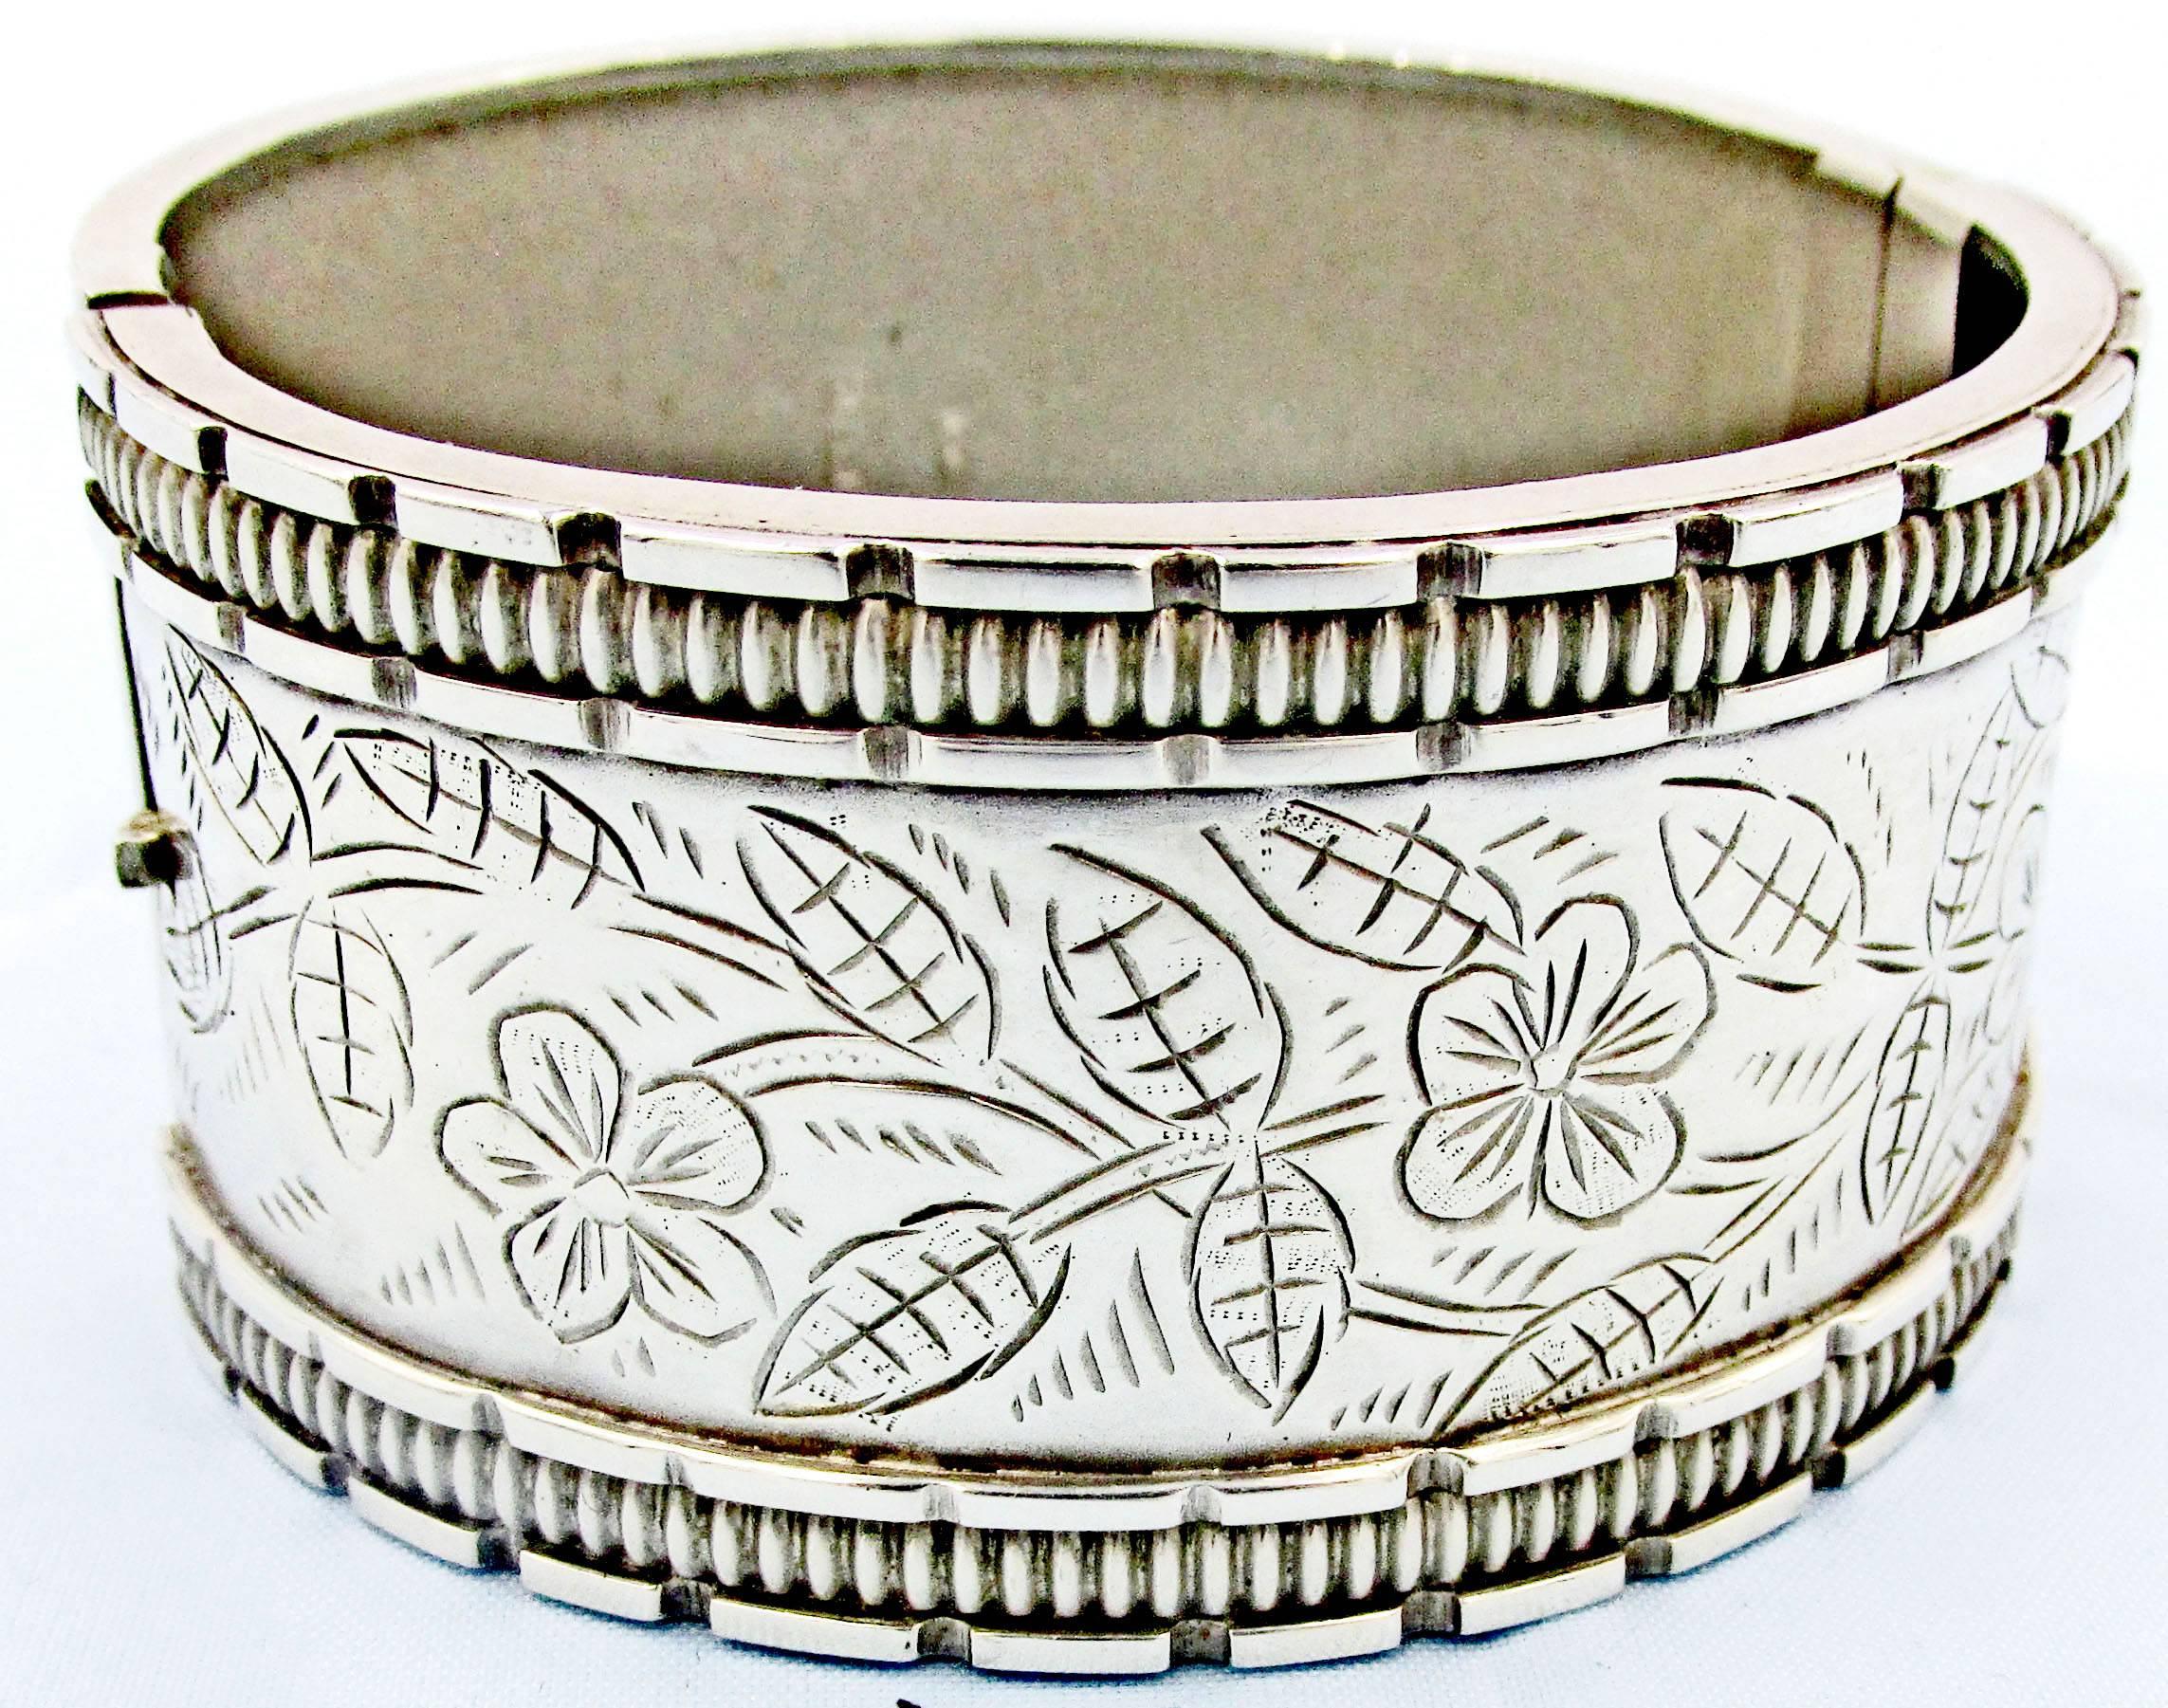 Victorian sterling silver cuff bracelet engraved with flowers and leaves under a ribbed border. The bracelet is stamped with the hallmarks for Birmingham 1883. Bangle bracelets were very popular during the Victorian era. 